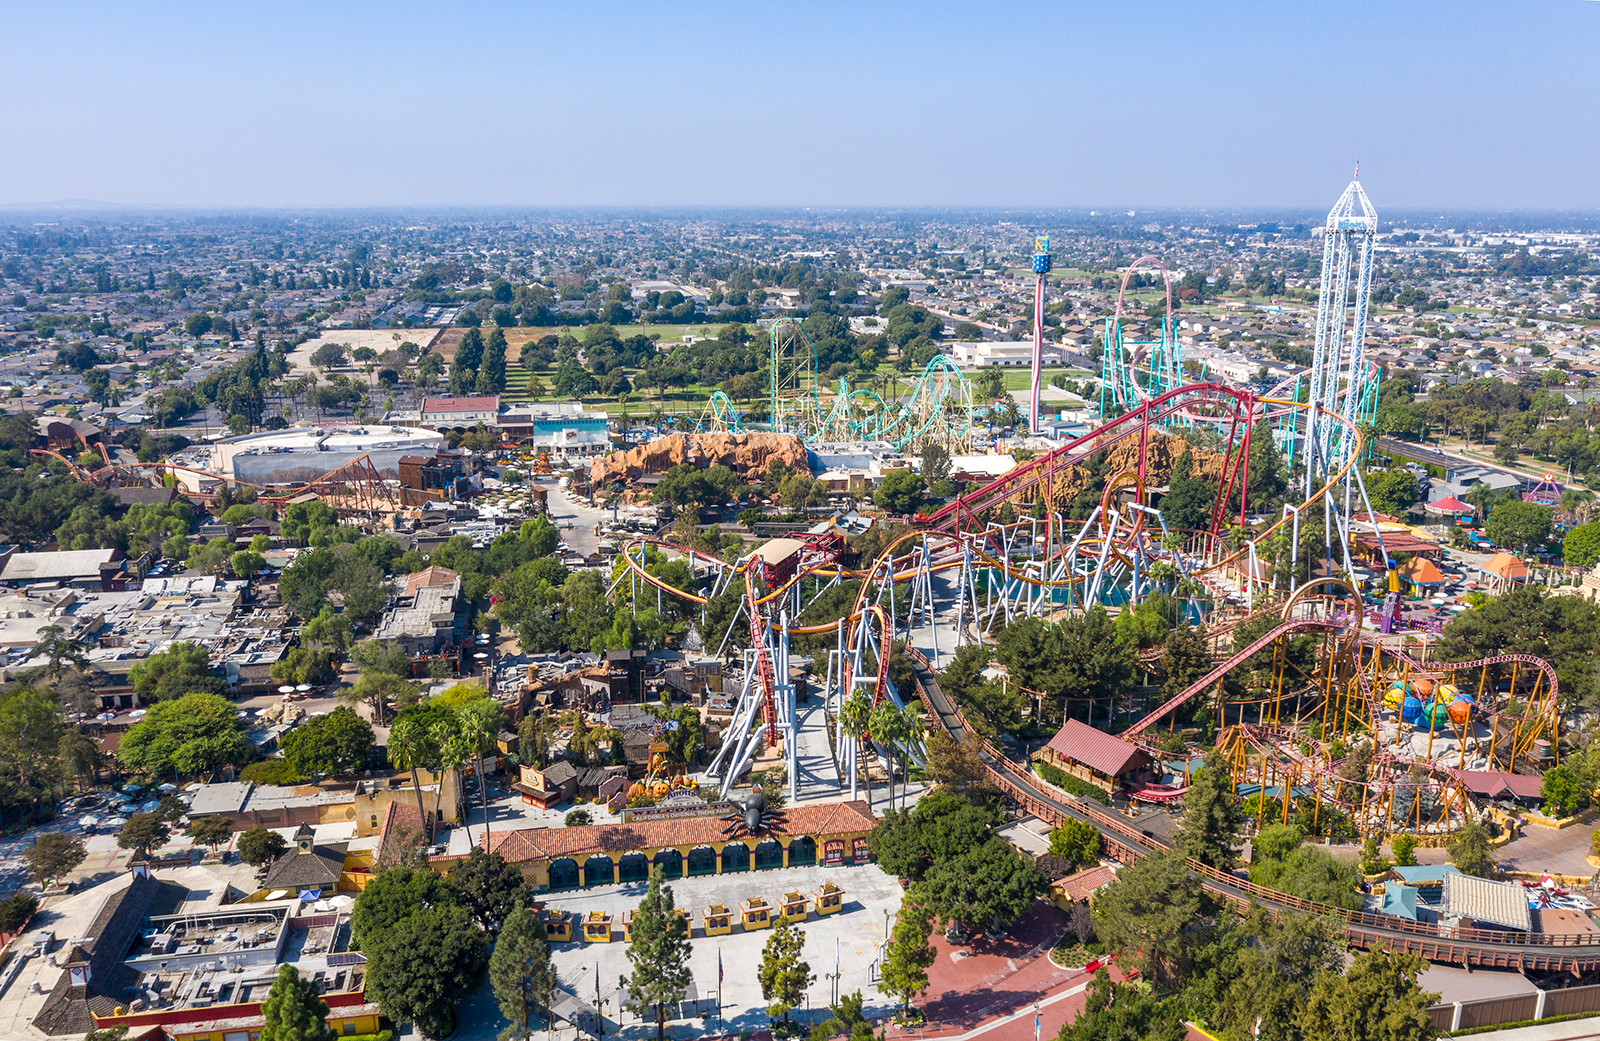 An aerial view of a closed Knott's Berry Farm in Buena Park, California, on October 20, 2020.